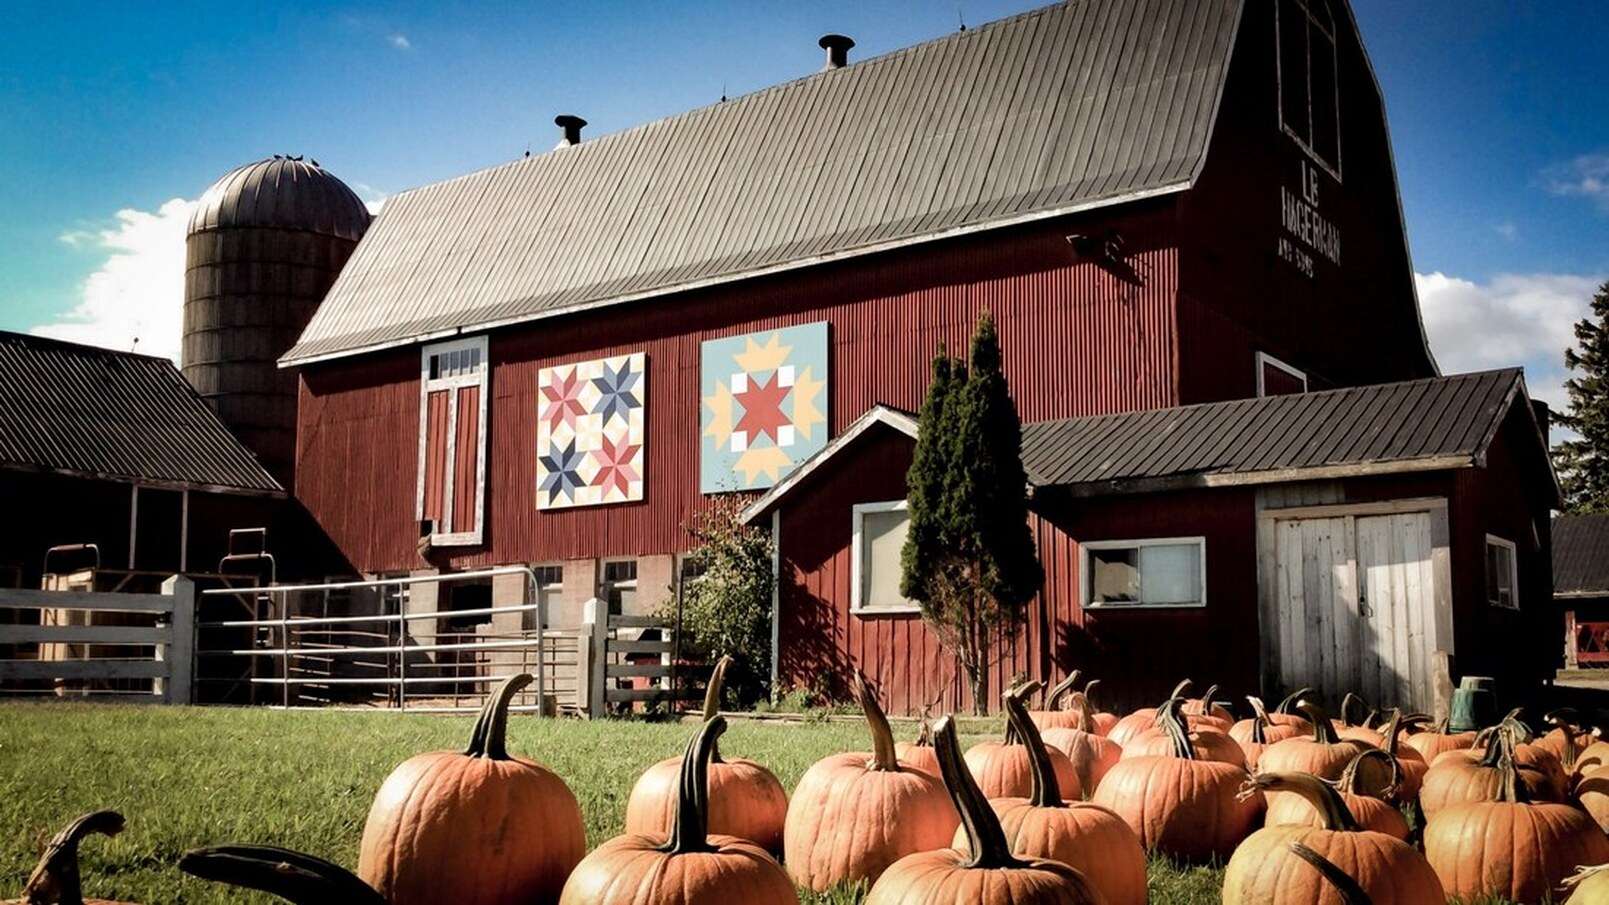 Here is a farm. In the background is a red barn and there are pumpkins in the front lawn